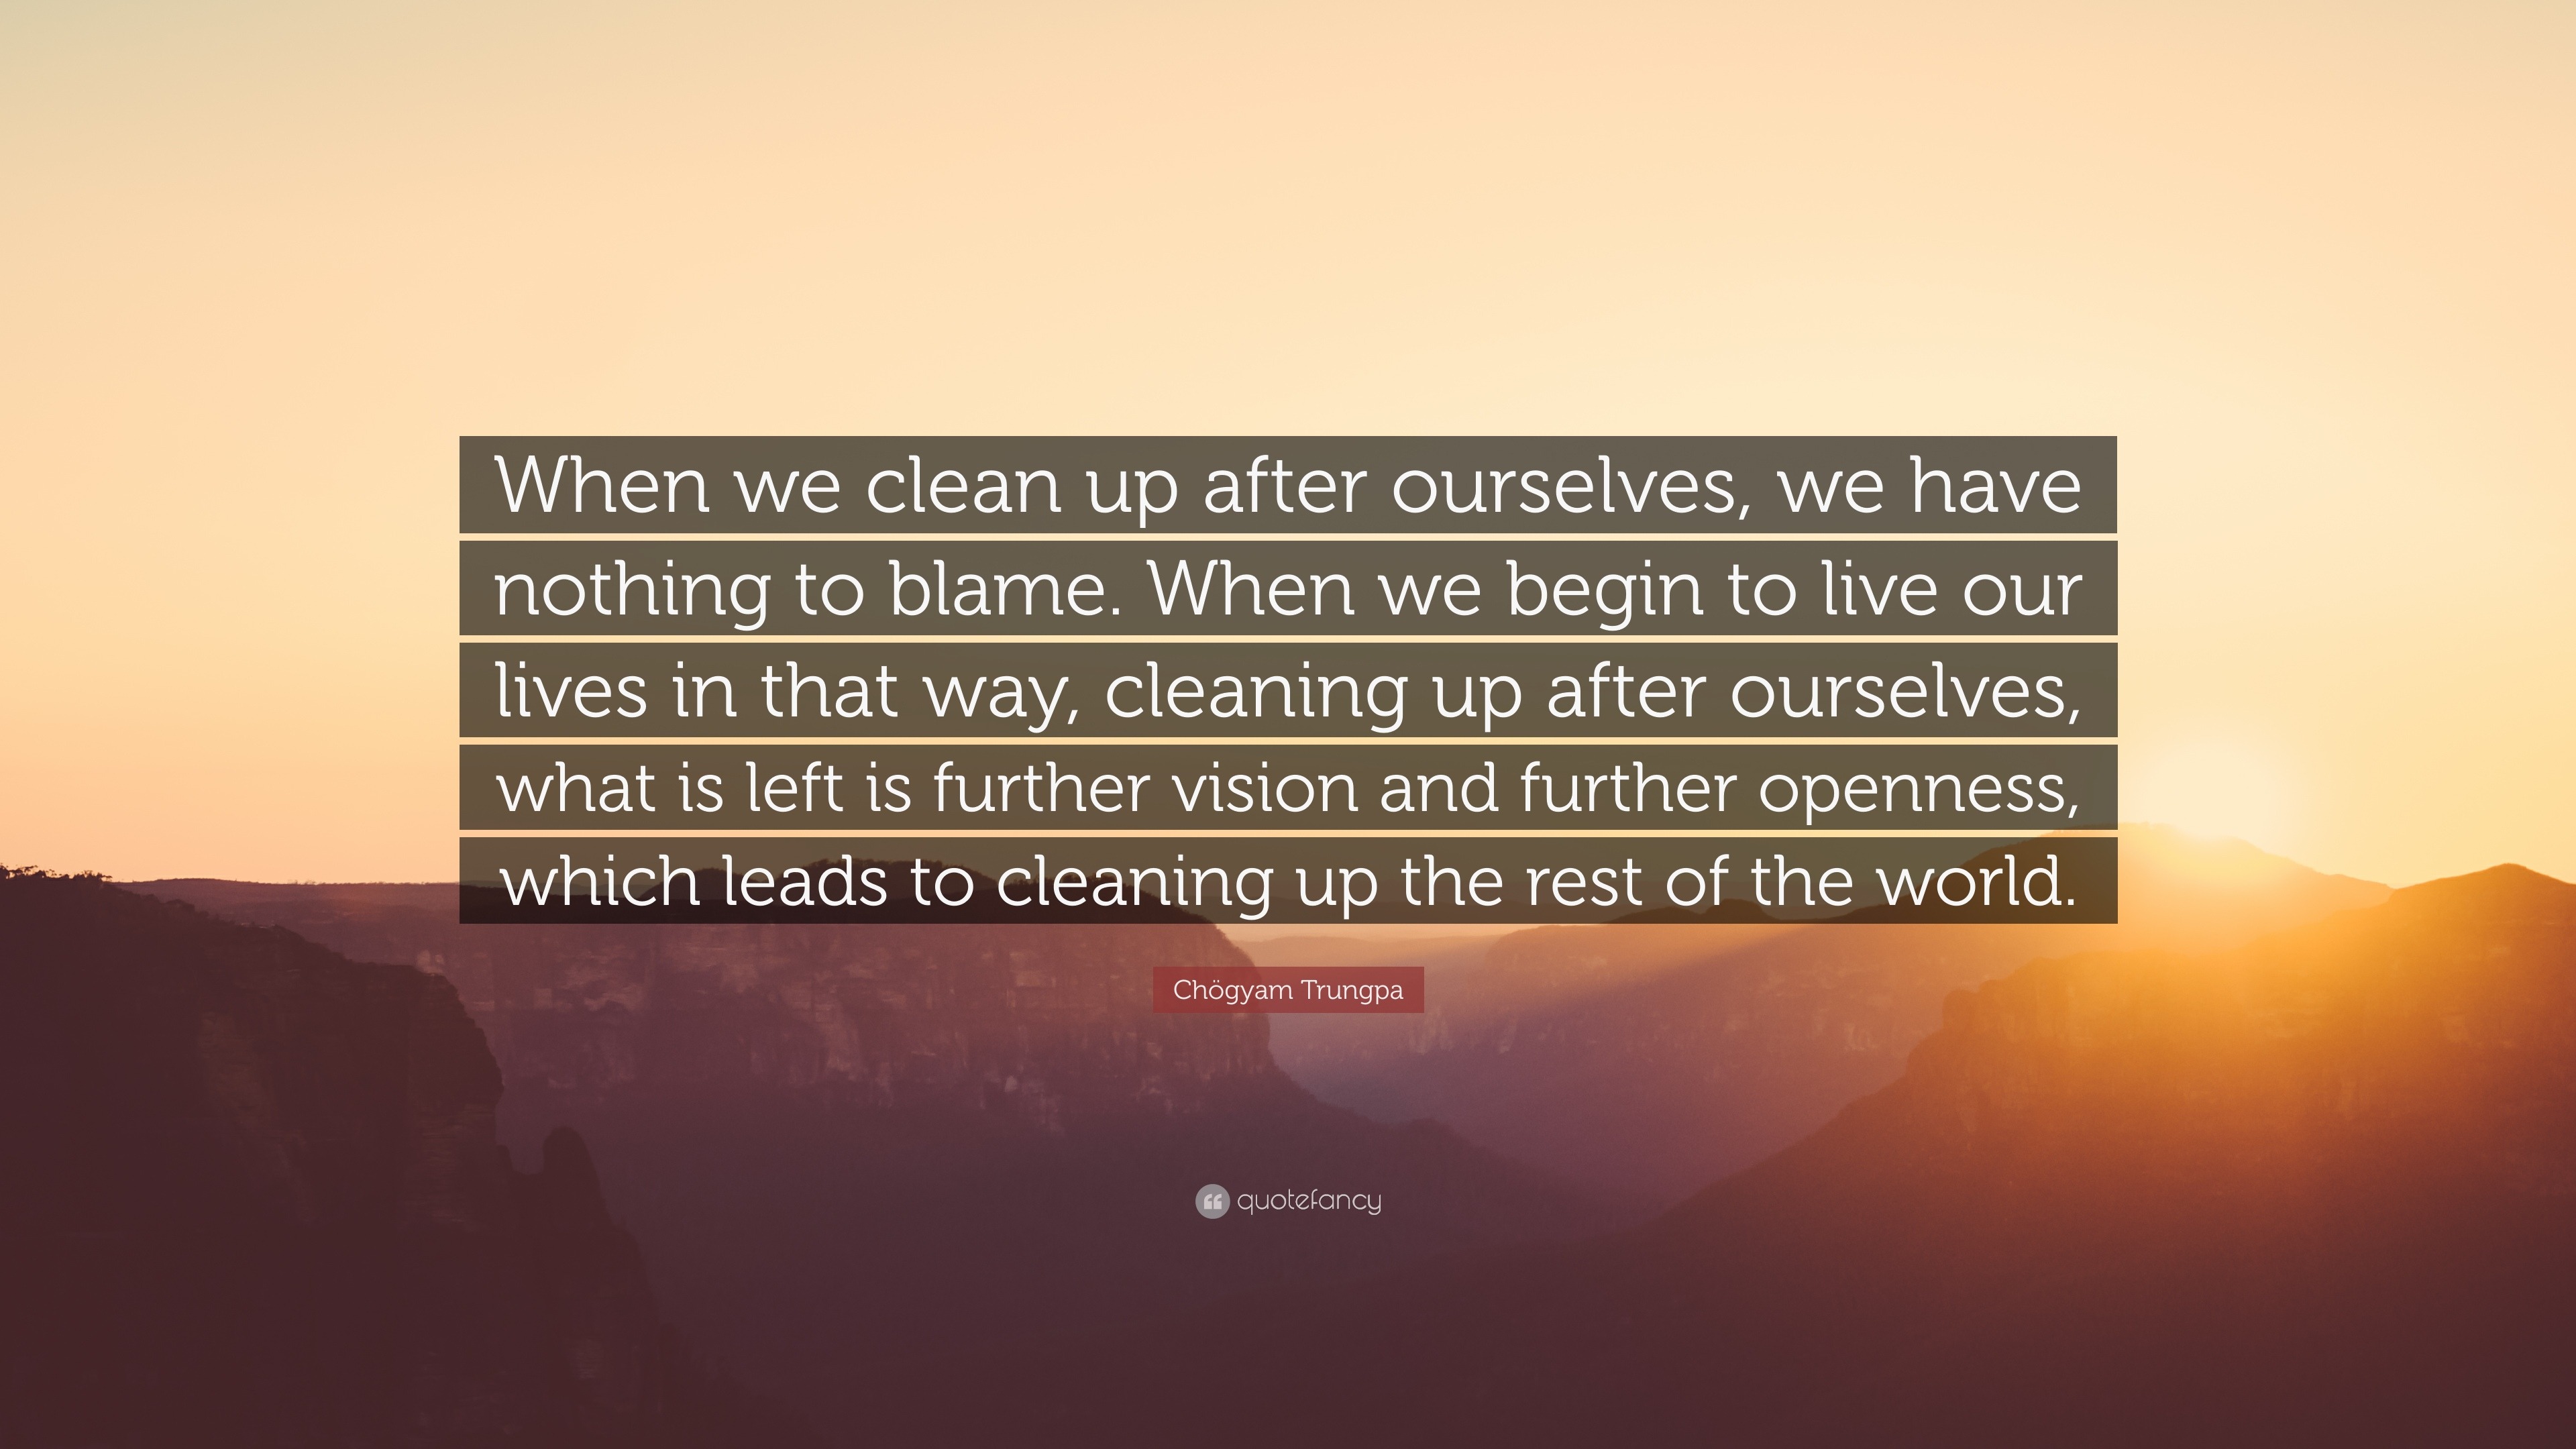 Chögyam Trungpa Quote: “When we clean up after ourselves, we have ...